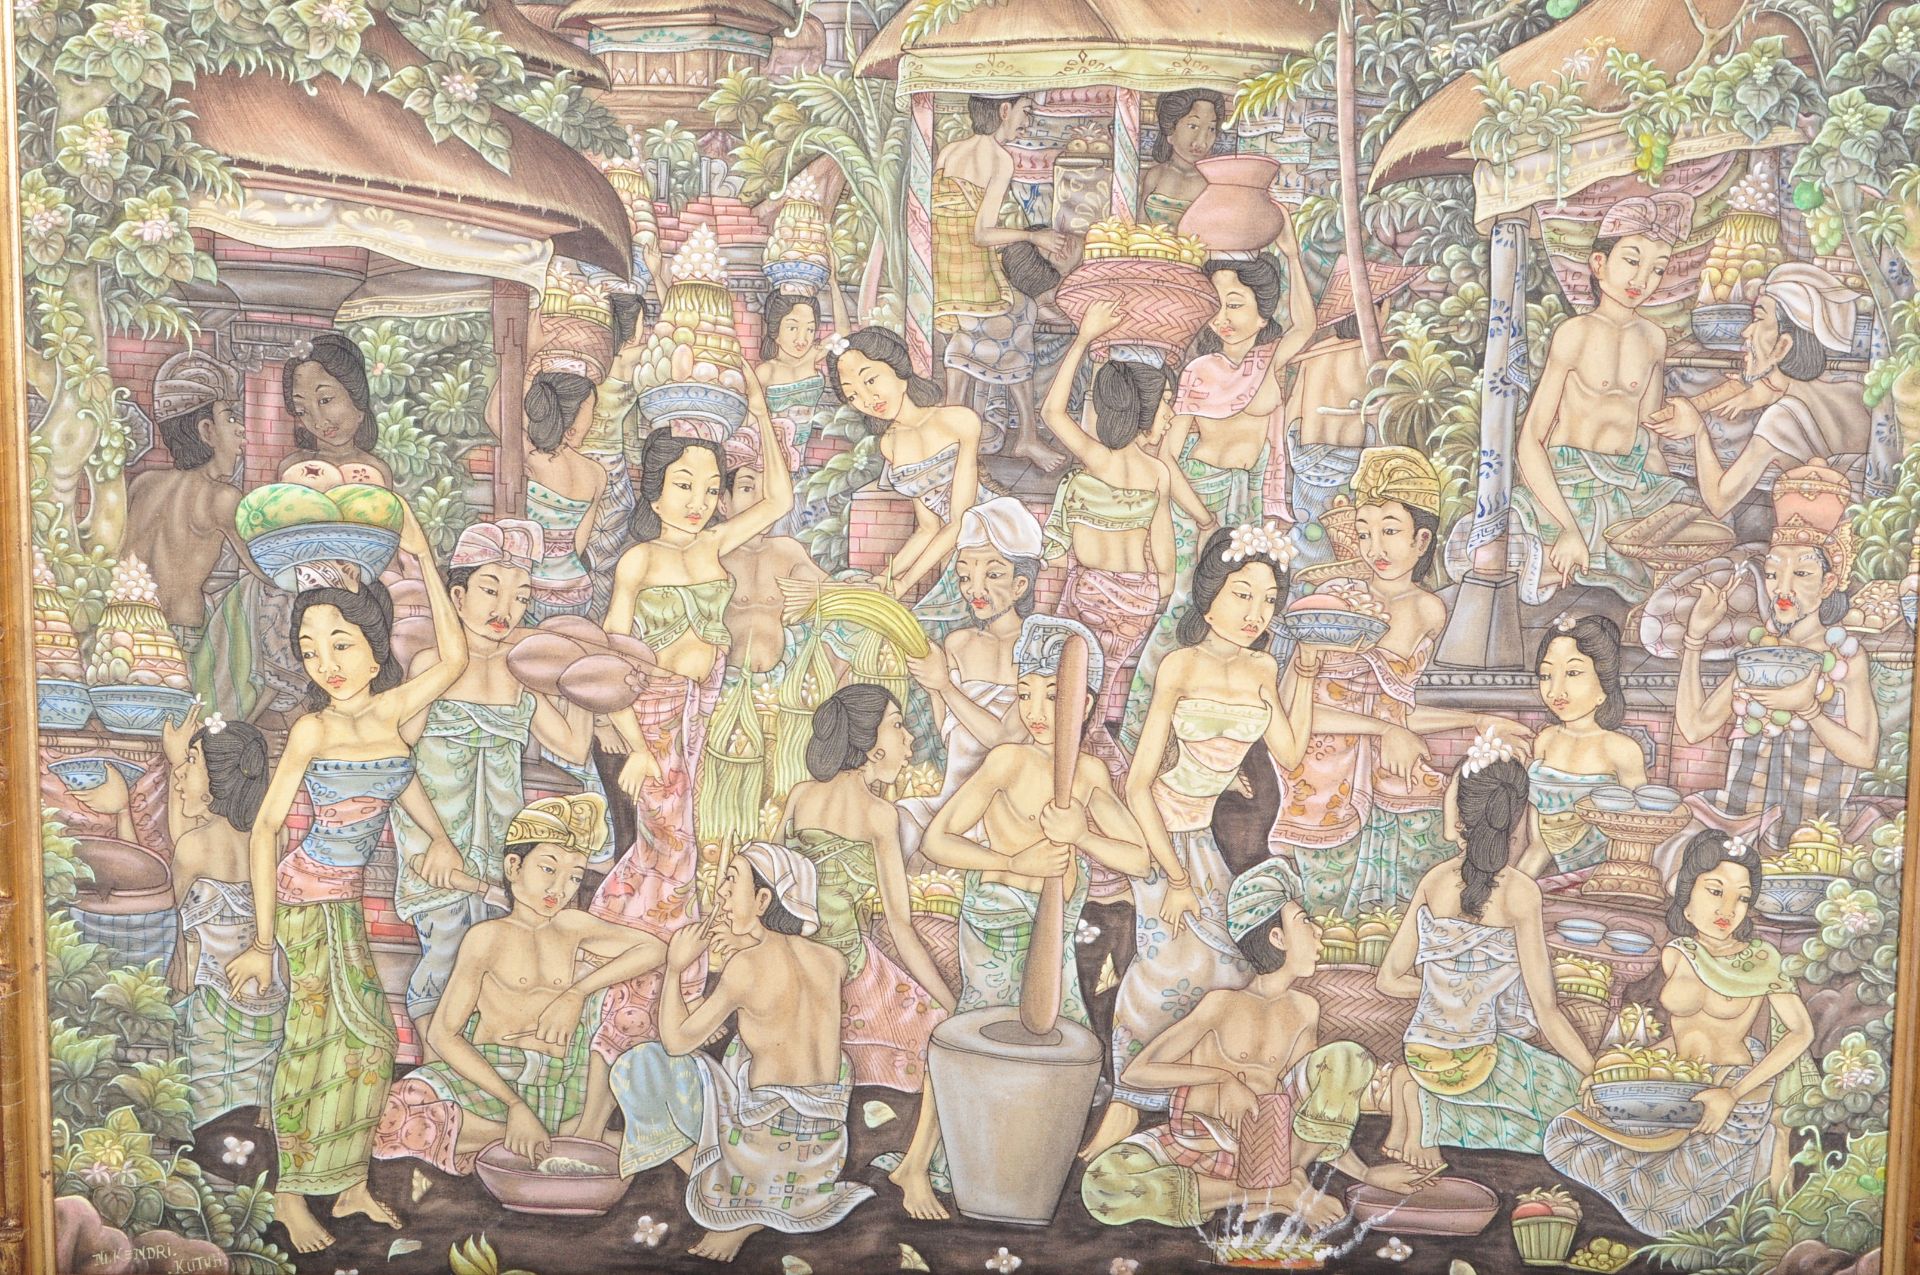 20TH CENTURY INDONESIAN BALINESE PAINTING - Image 2 of 5